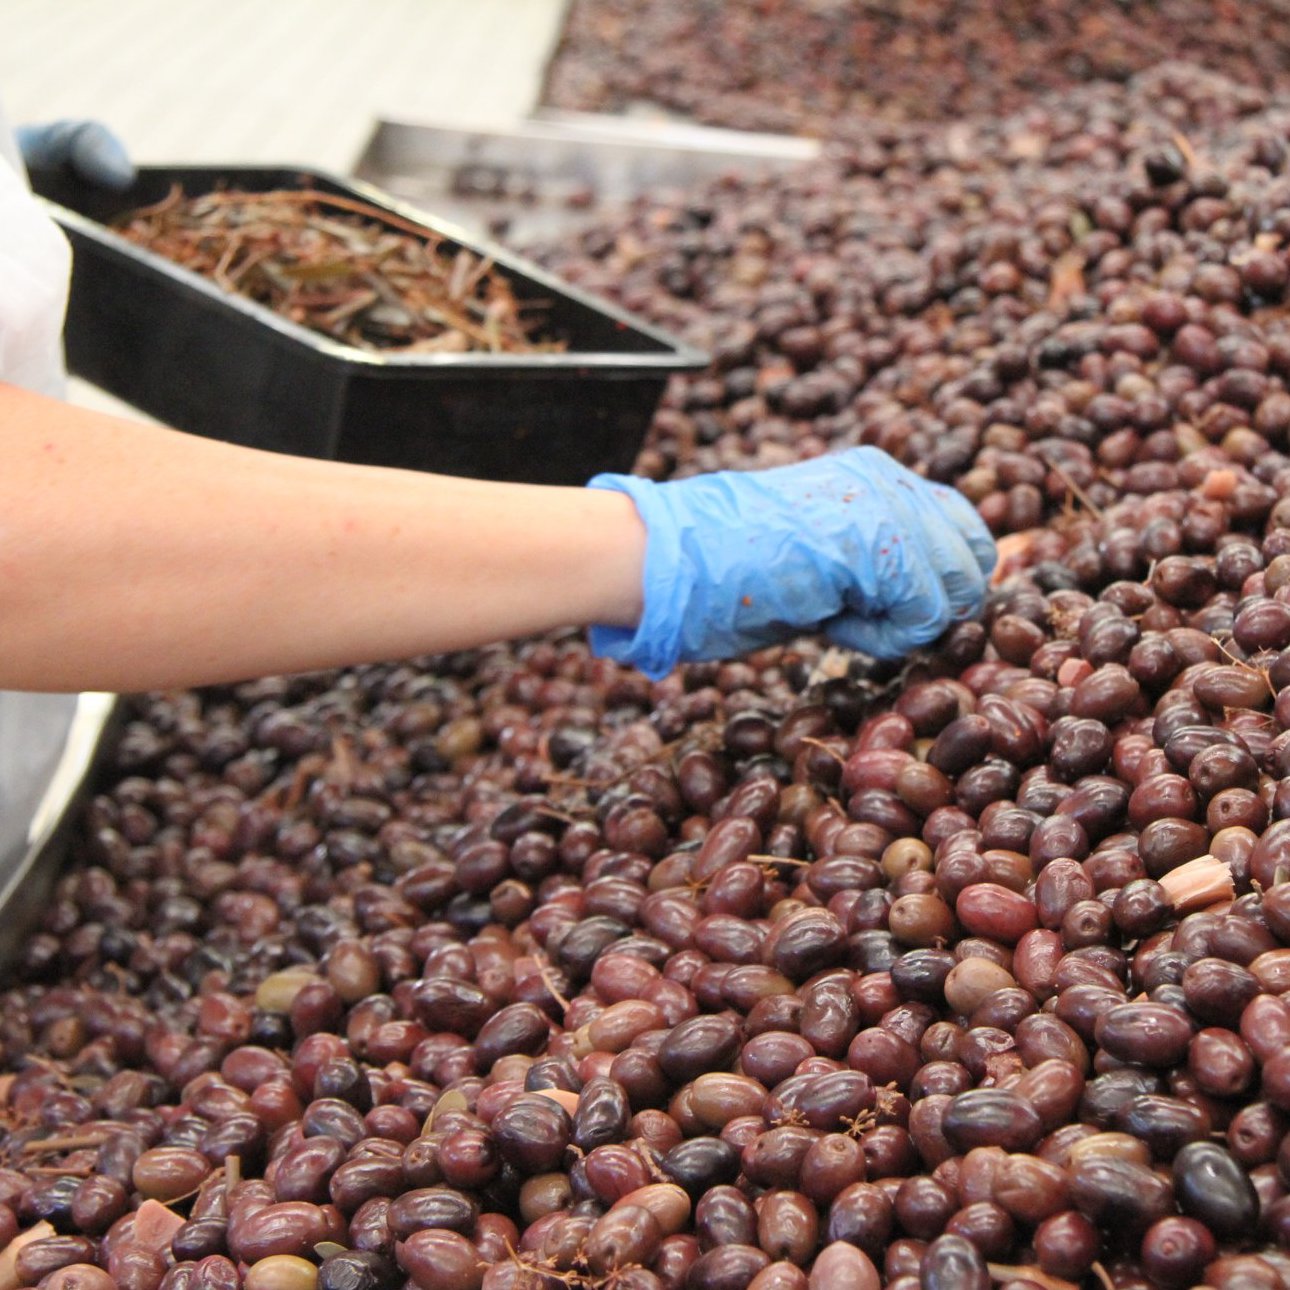 Women doing quality control on olives